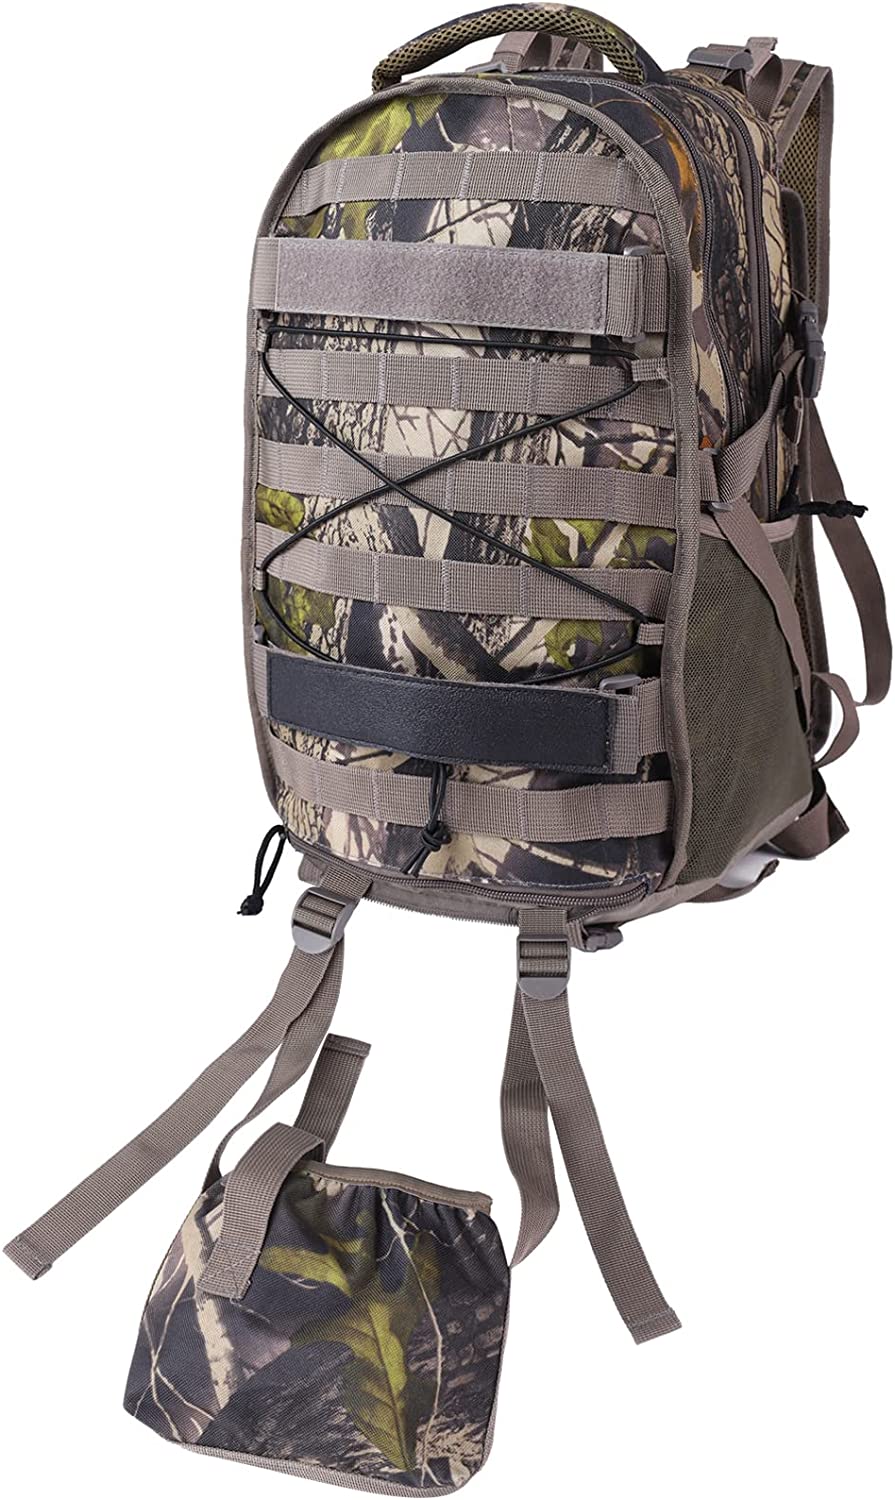 KIRIOUL Hunting Backpack with Waterproof Rain Cover Camo Backpack with Bow and Rifle Holder for Camping,Hiking